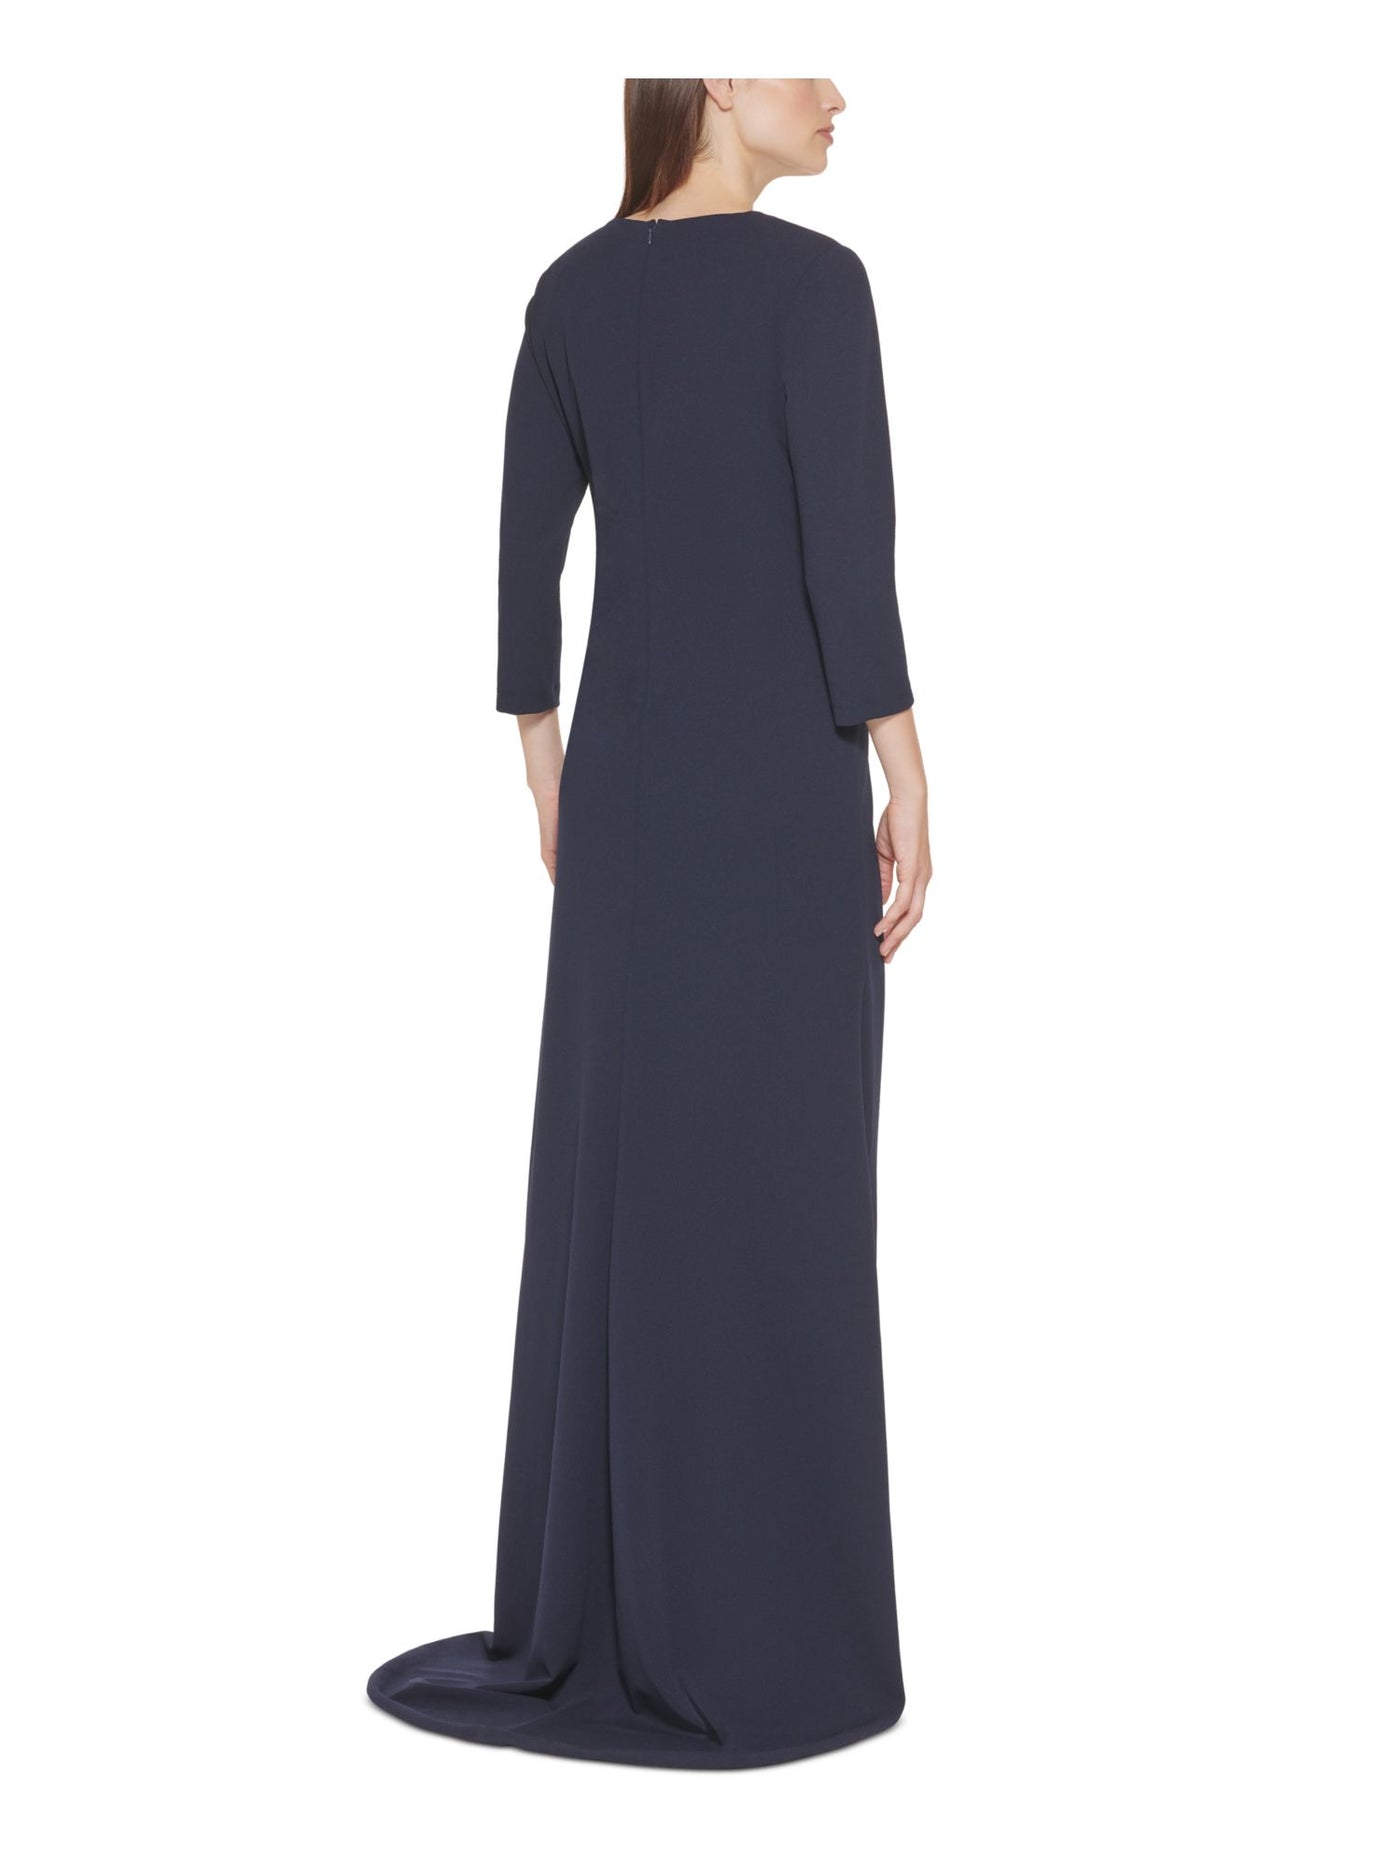 CALVIN KLEIN Womens Navy Zippered Pleated Button Detail Gown Lined 3/4 Sleeve V Neck Full-Length Formal Faux Wrap Dress 6